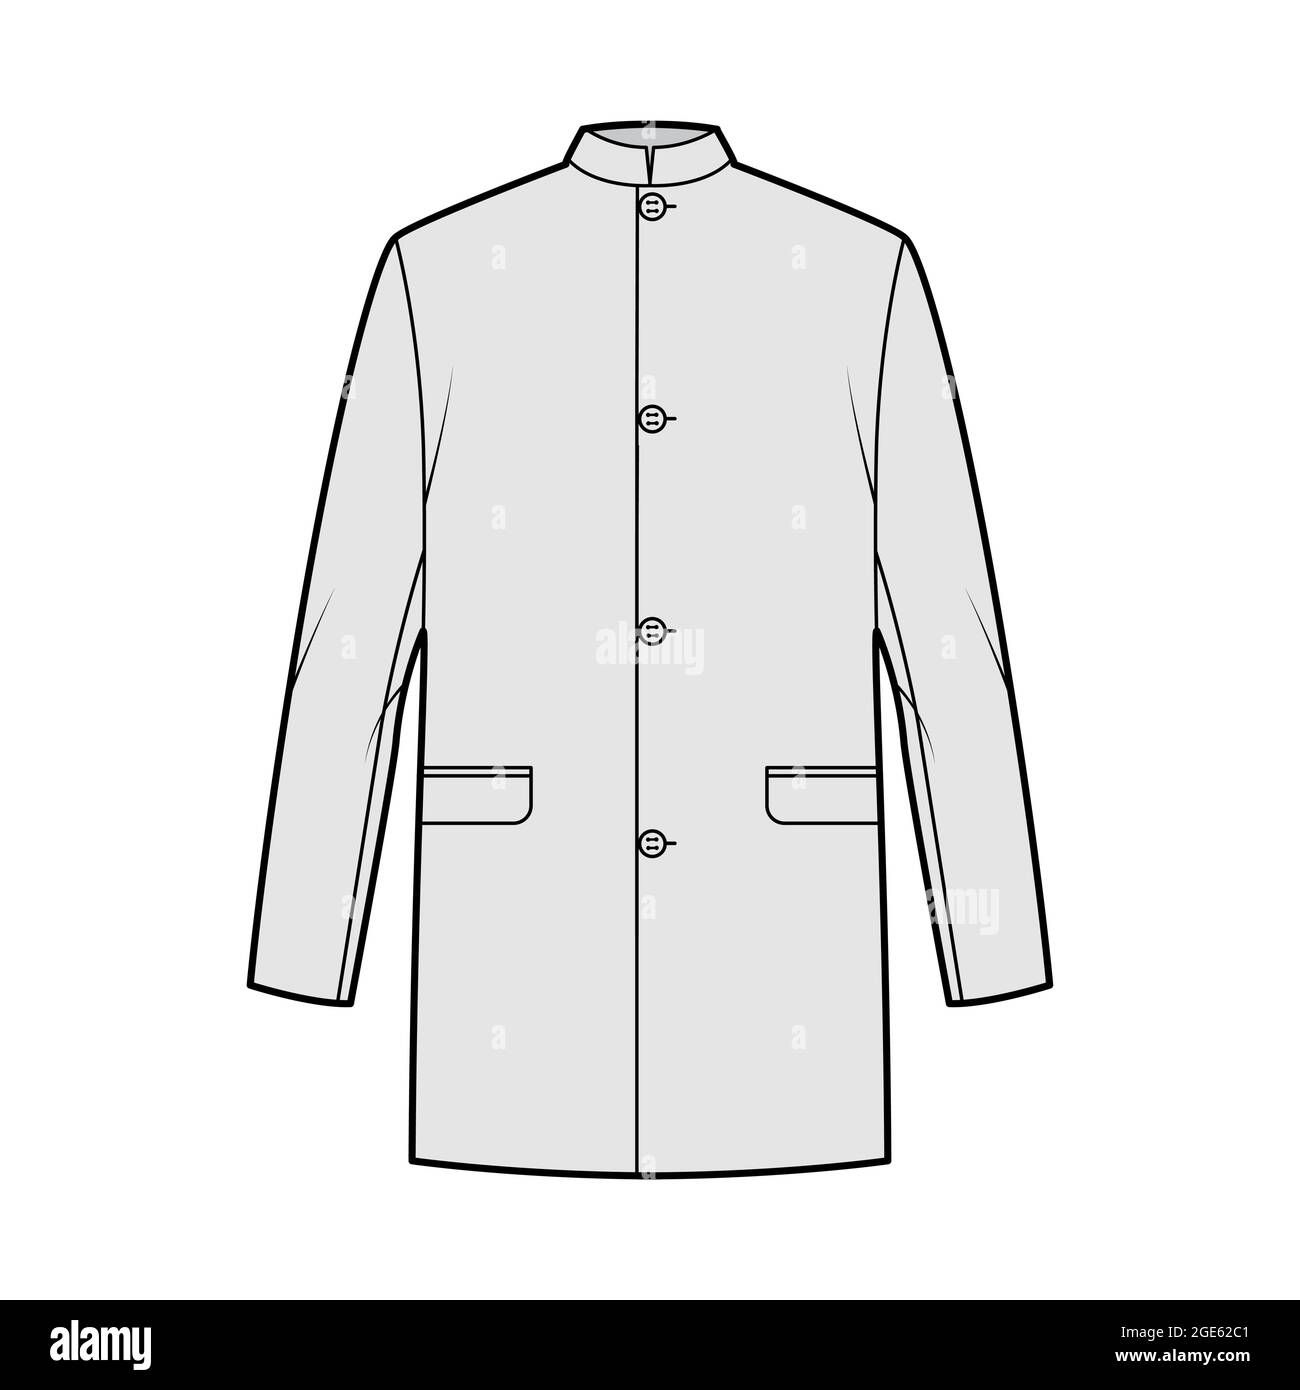 Nehru jacket technical fashion illustration with oversized, stand collar, flap pockets, oversized, long sleeves. Flat coat apparel template front, grey color style. Women, men, unisex CAD mockup Stock Vector